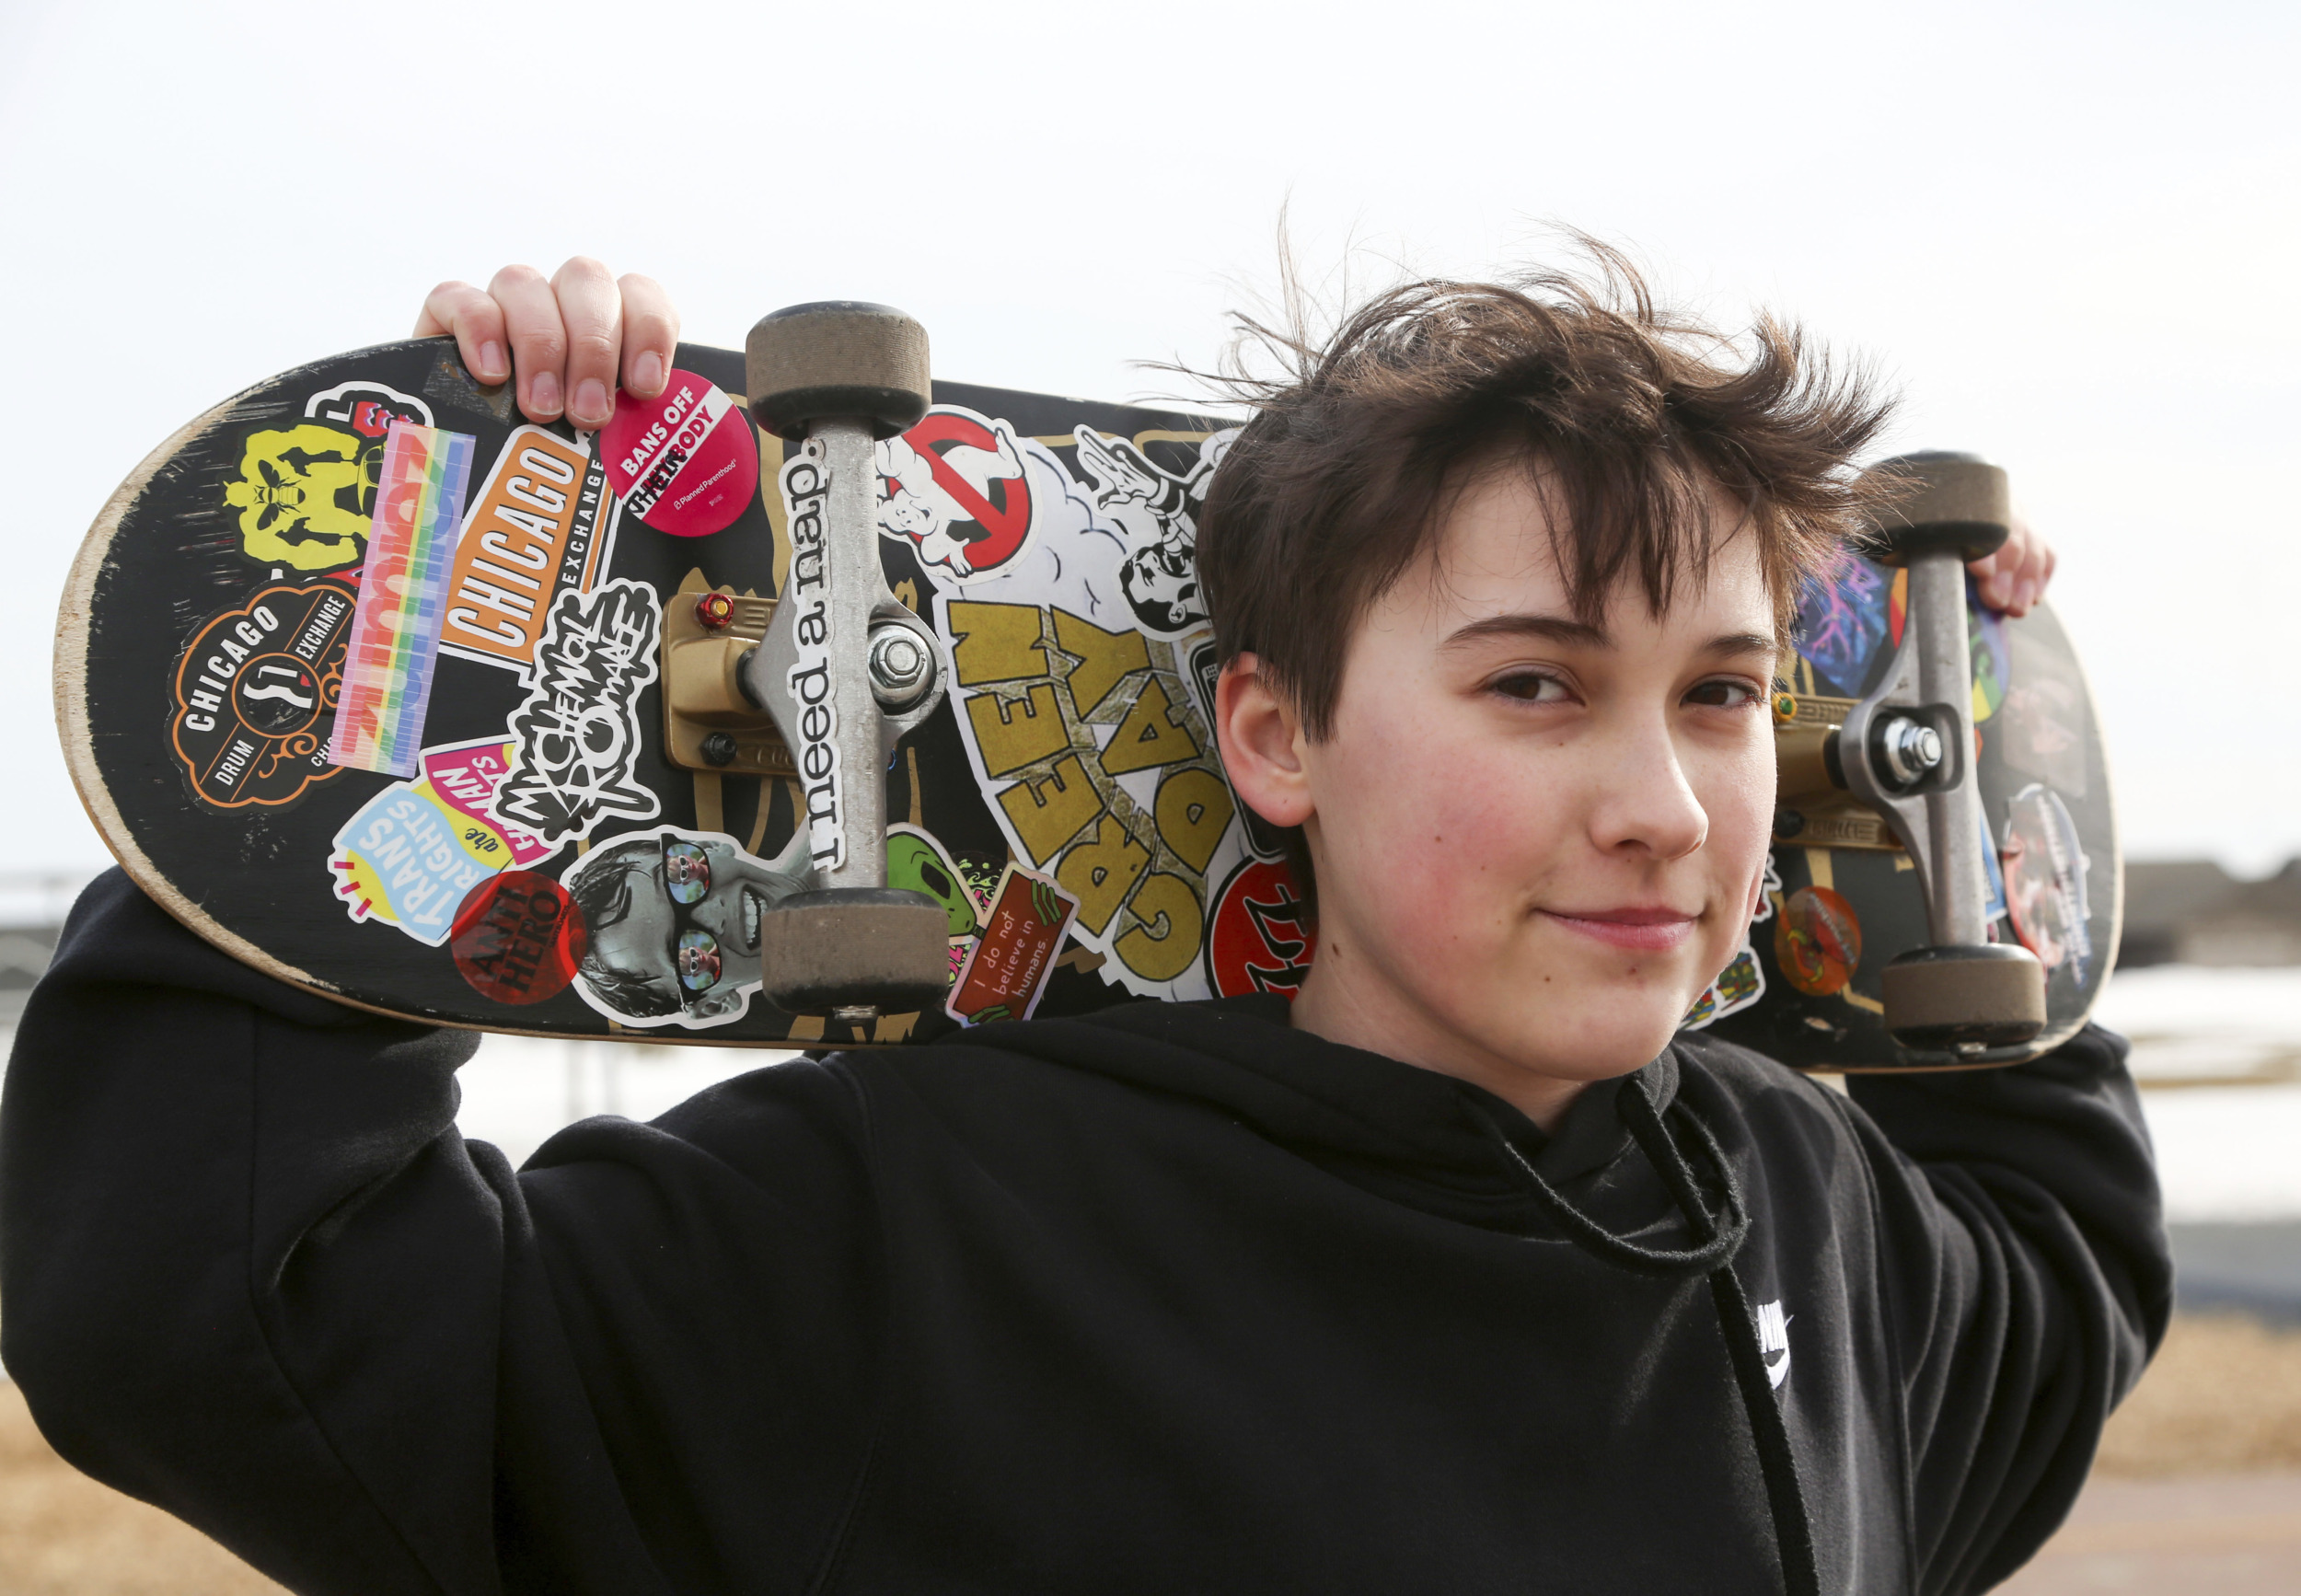 Transgender treatment for kids: Young peron with shprt dark hair on black sweatshirt stands holding colorful skateboard behine their head with both hands.